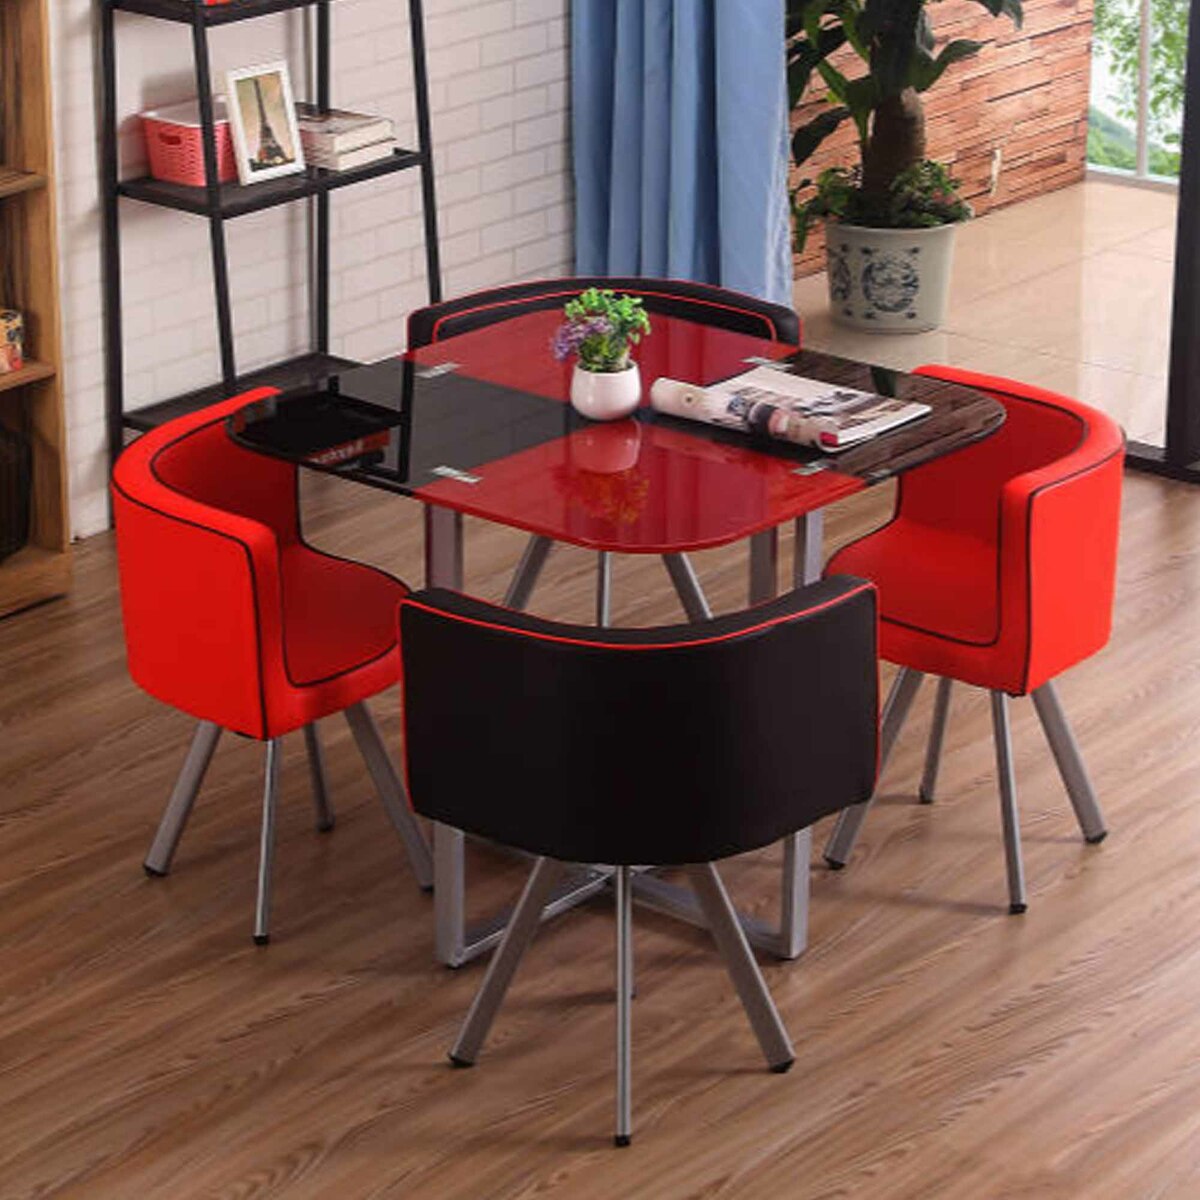 Buy Maple Leaf Home Glass Dining Table Size H75 X W90 X L90cm 4 Chair Red Black Color Online Lulu Hypermarket Oman